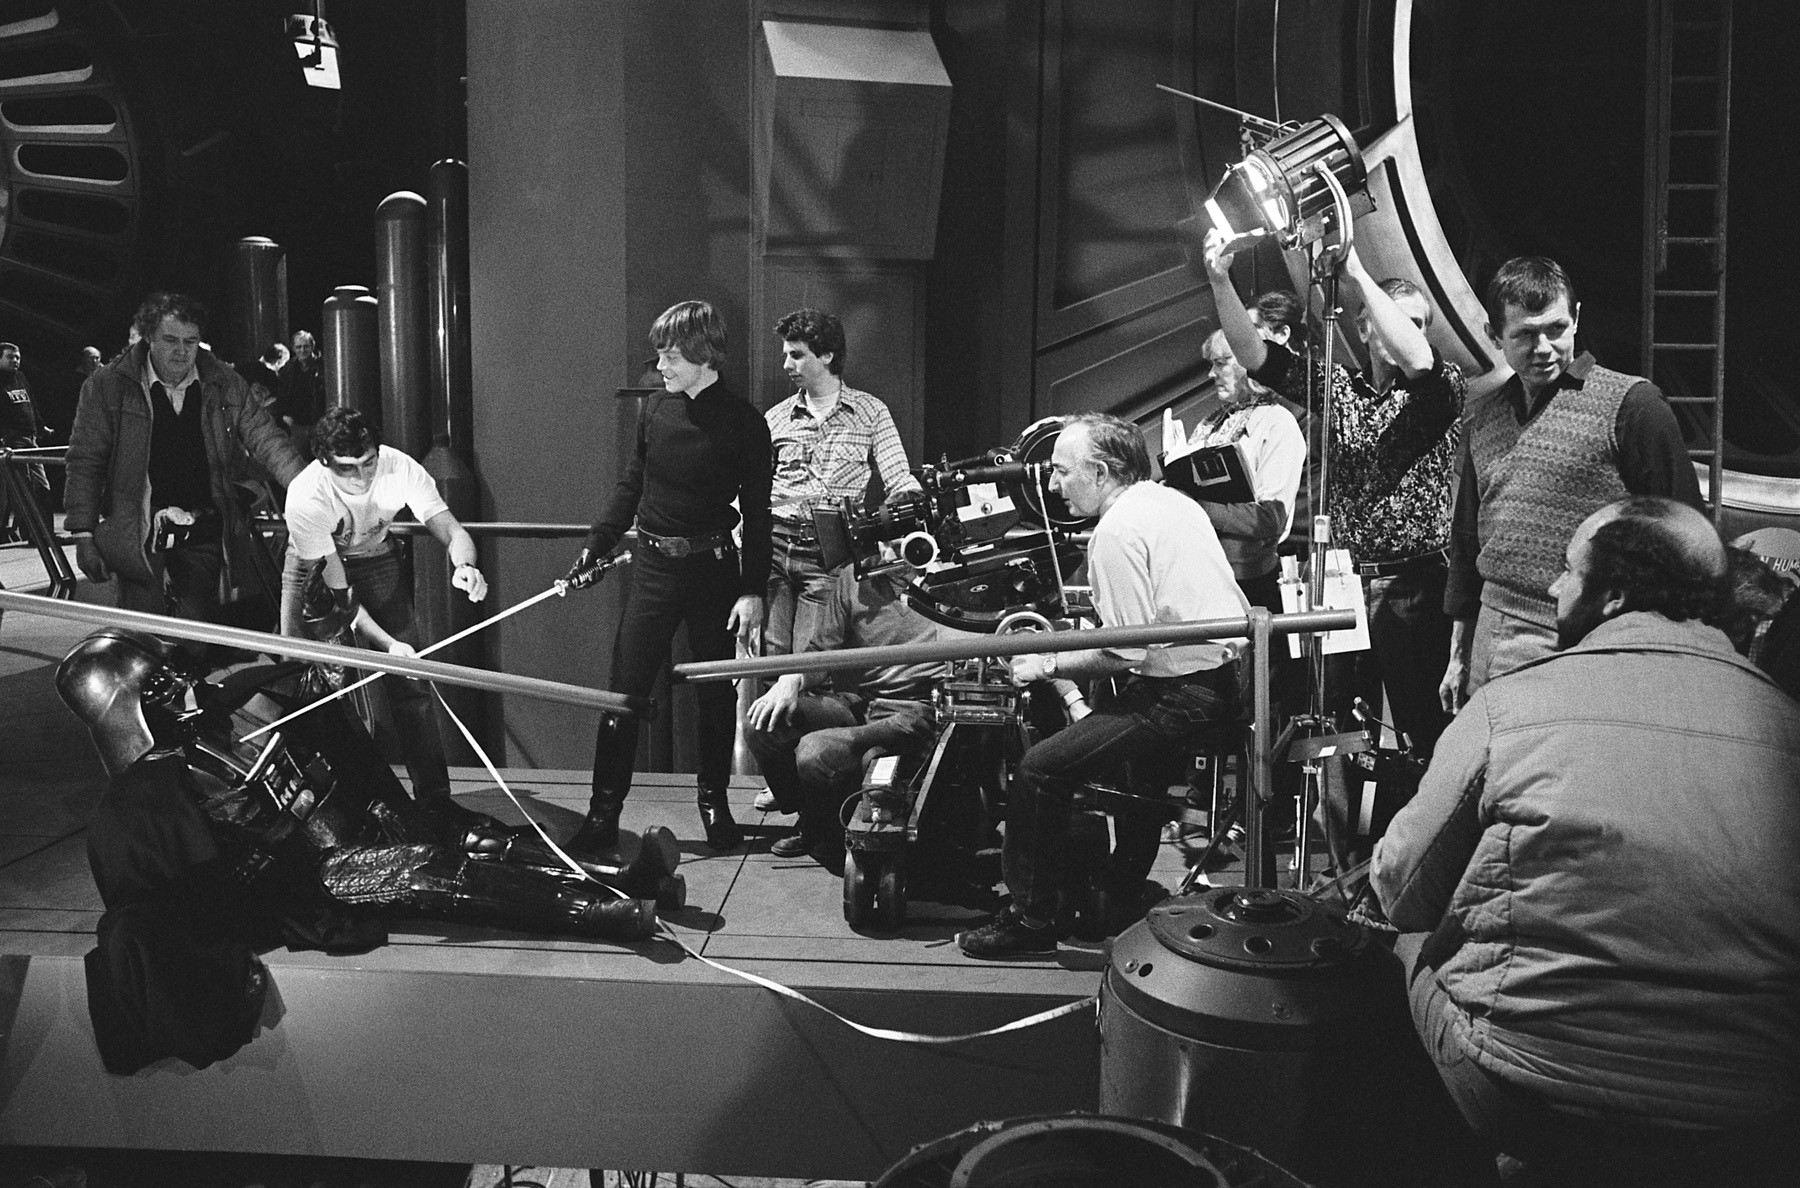 The Star Wars film crew during Lukes climactic moment in Episode VI